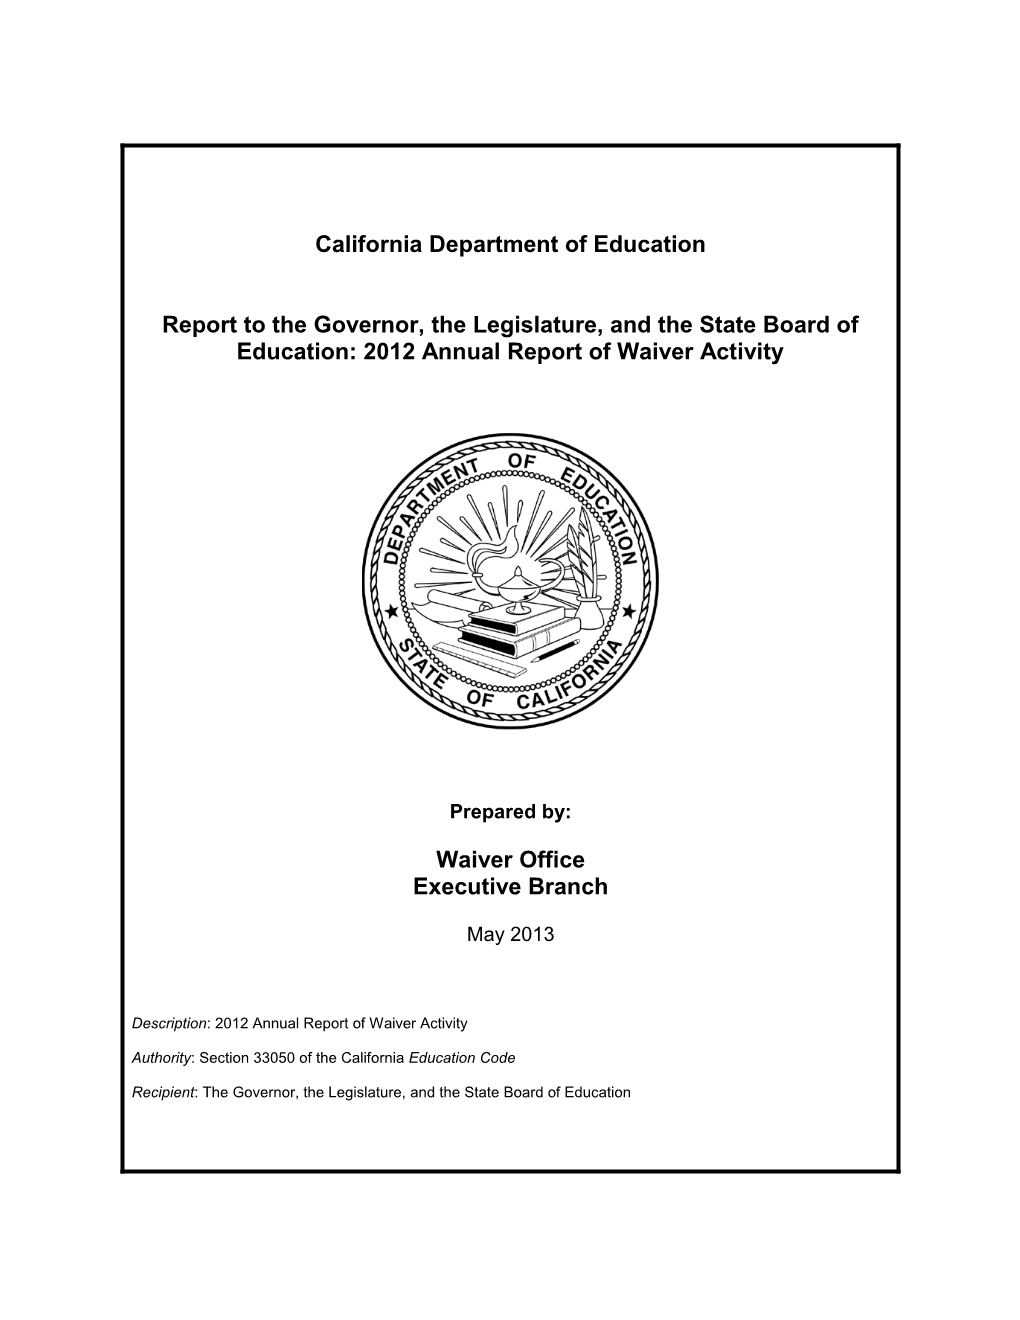 Annual Report of Waiver Activity for 2012 - Waivers (CA Dept of Education)